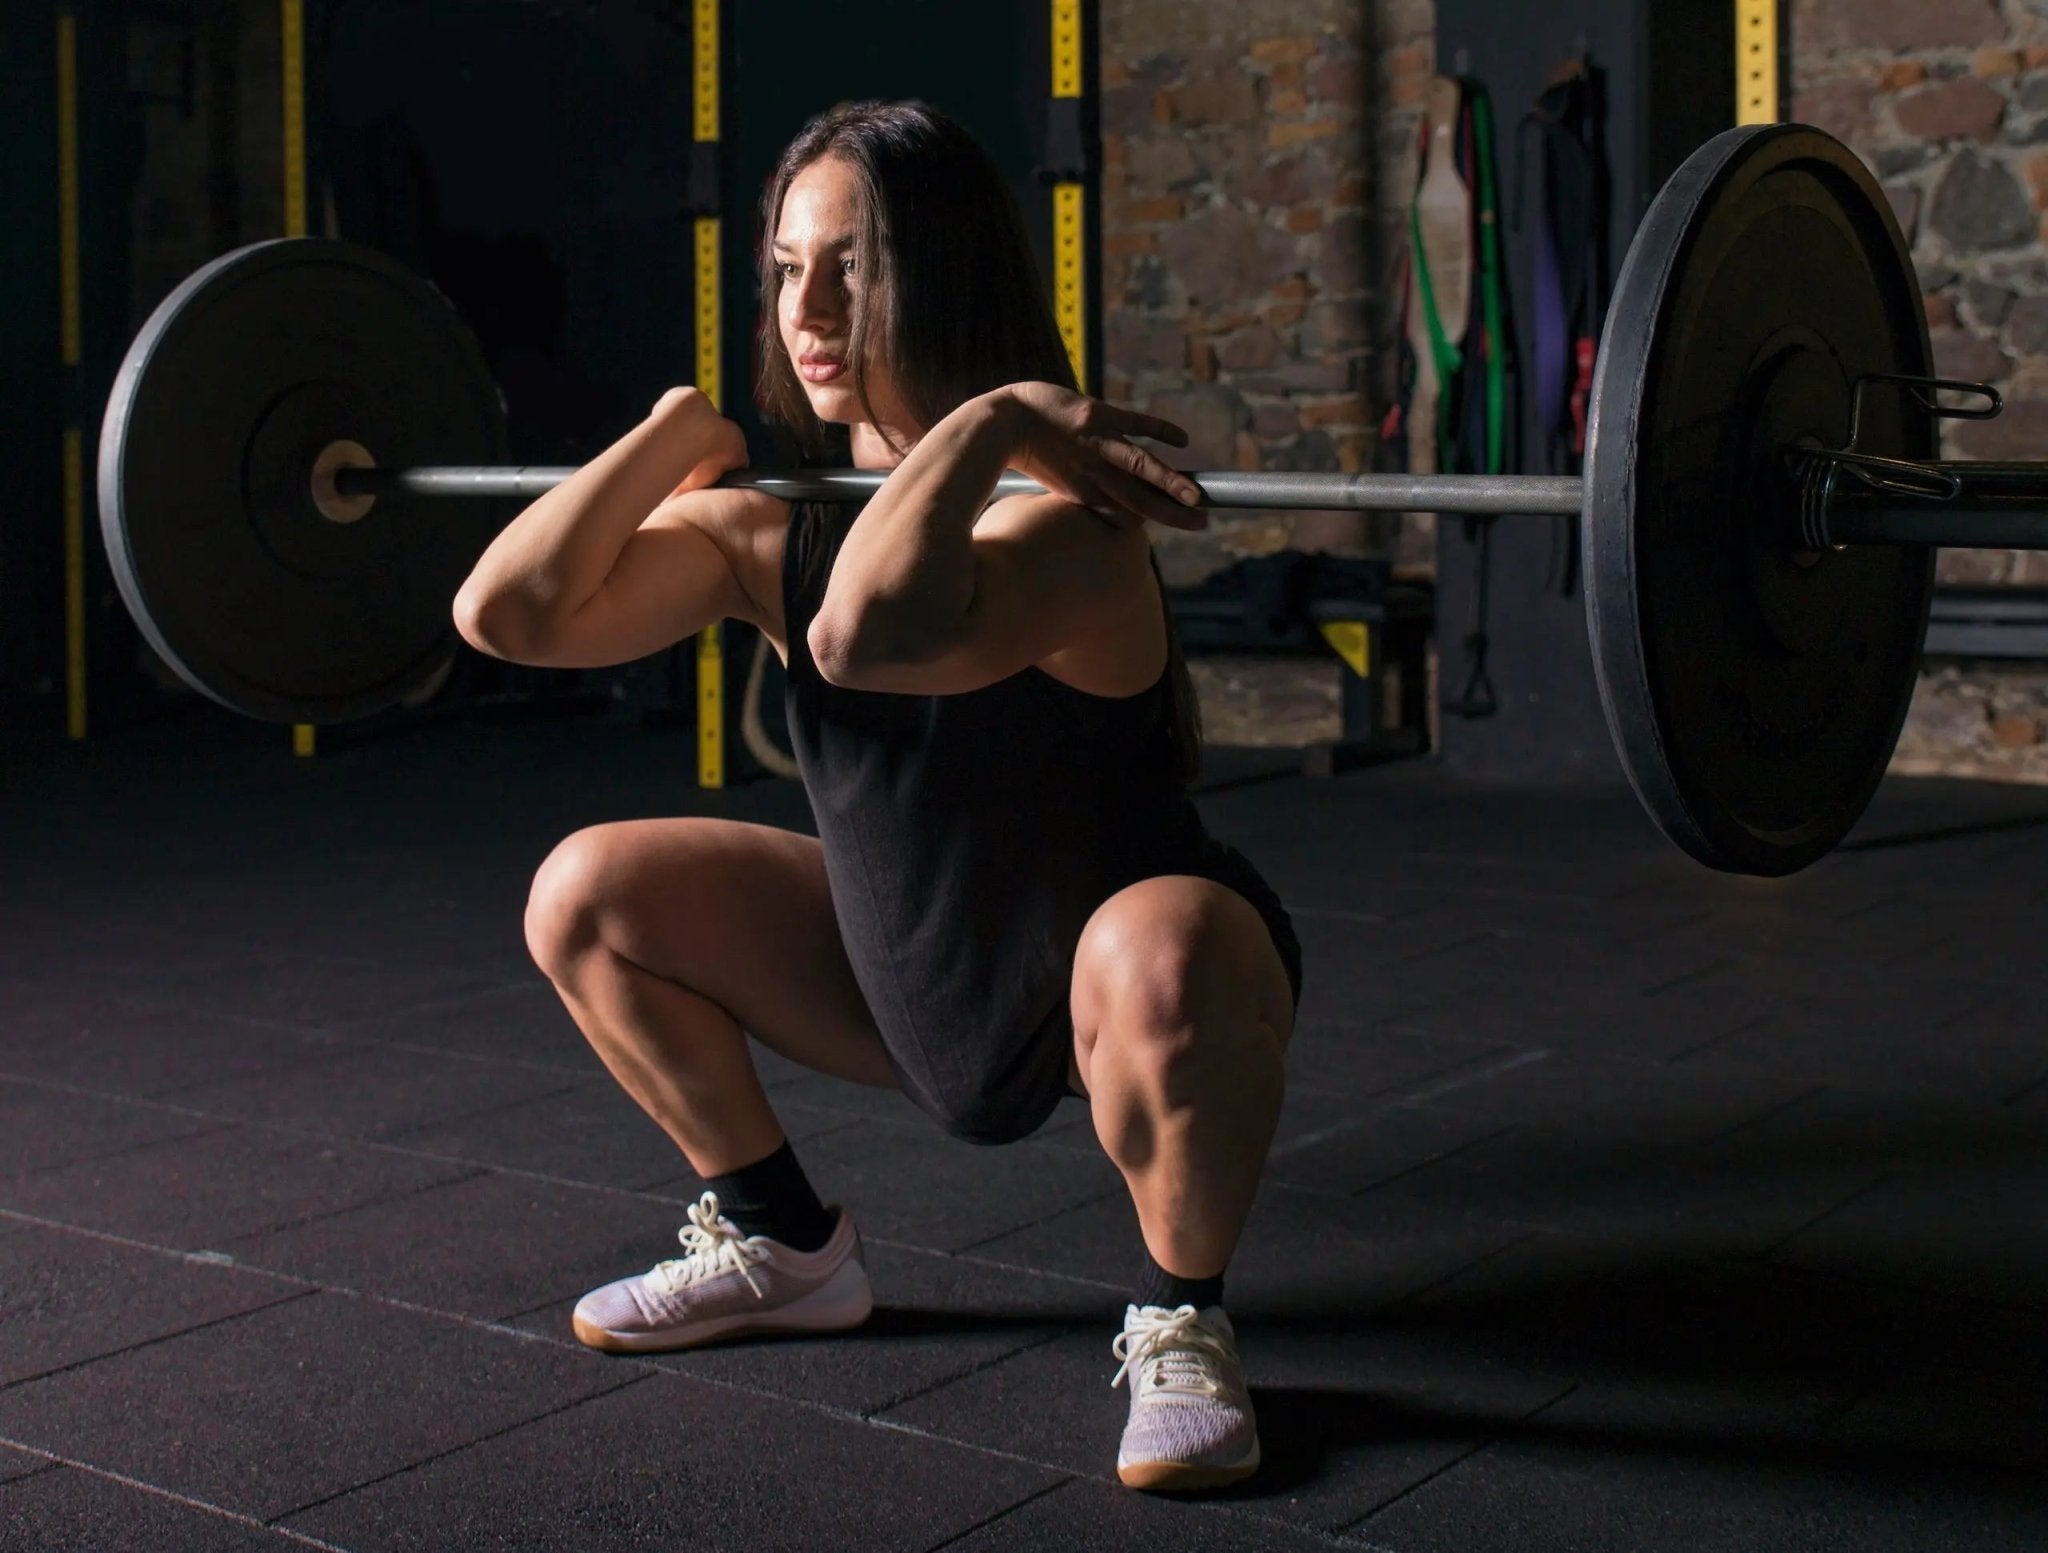 The Dumbbell Squat: Proper Form, Benefits, and Variations - The